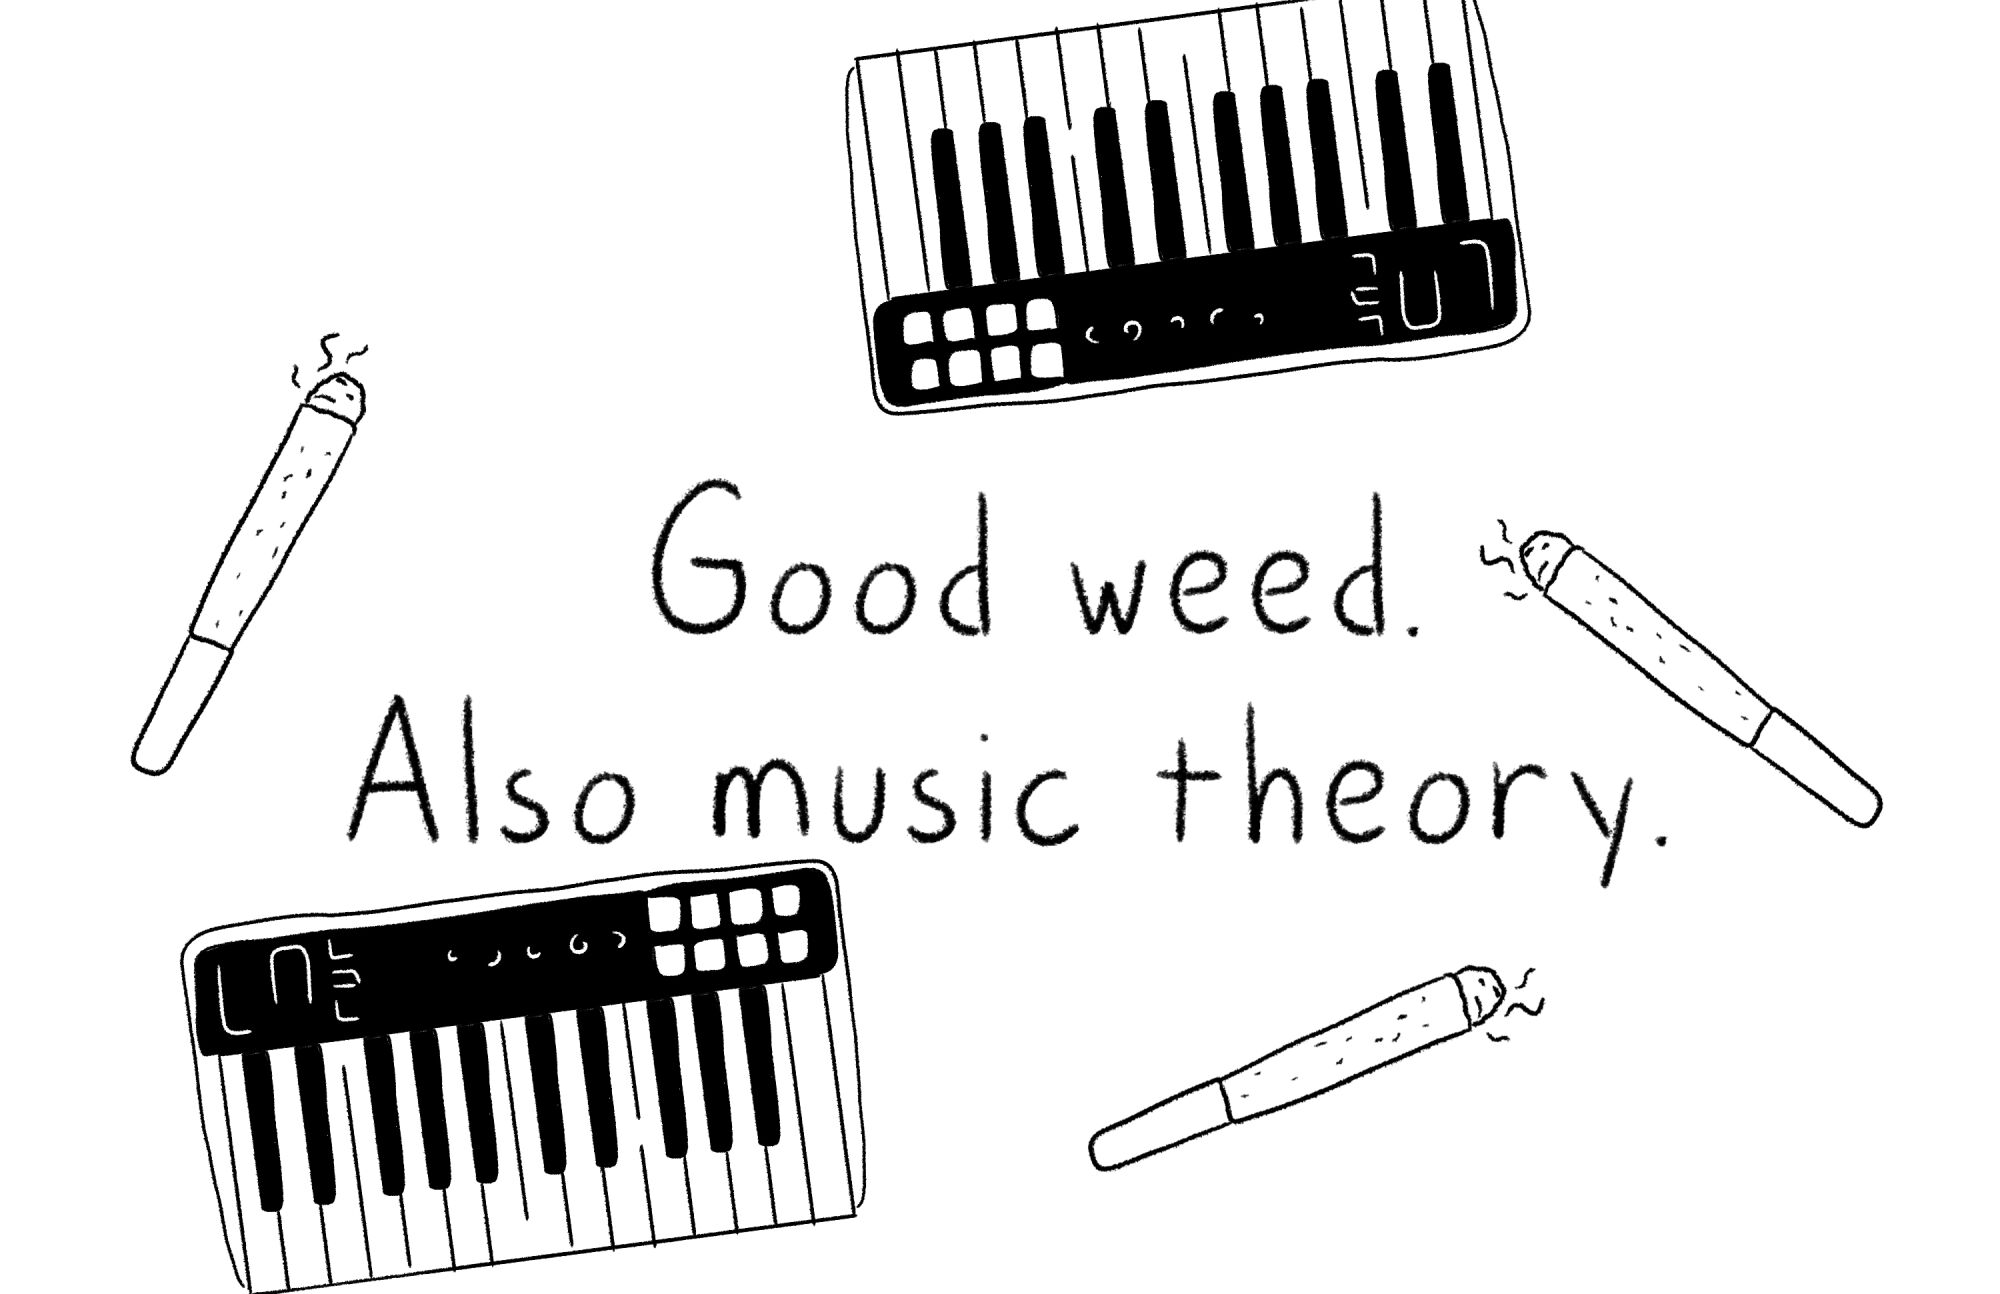 The words "good weed. also music theory" with drawings of a joint and a keyboard.